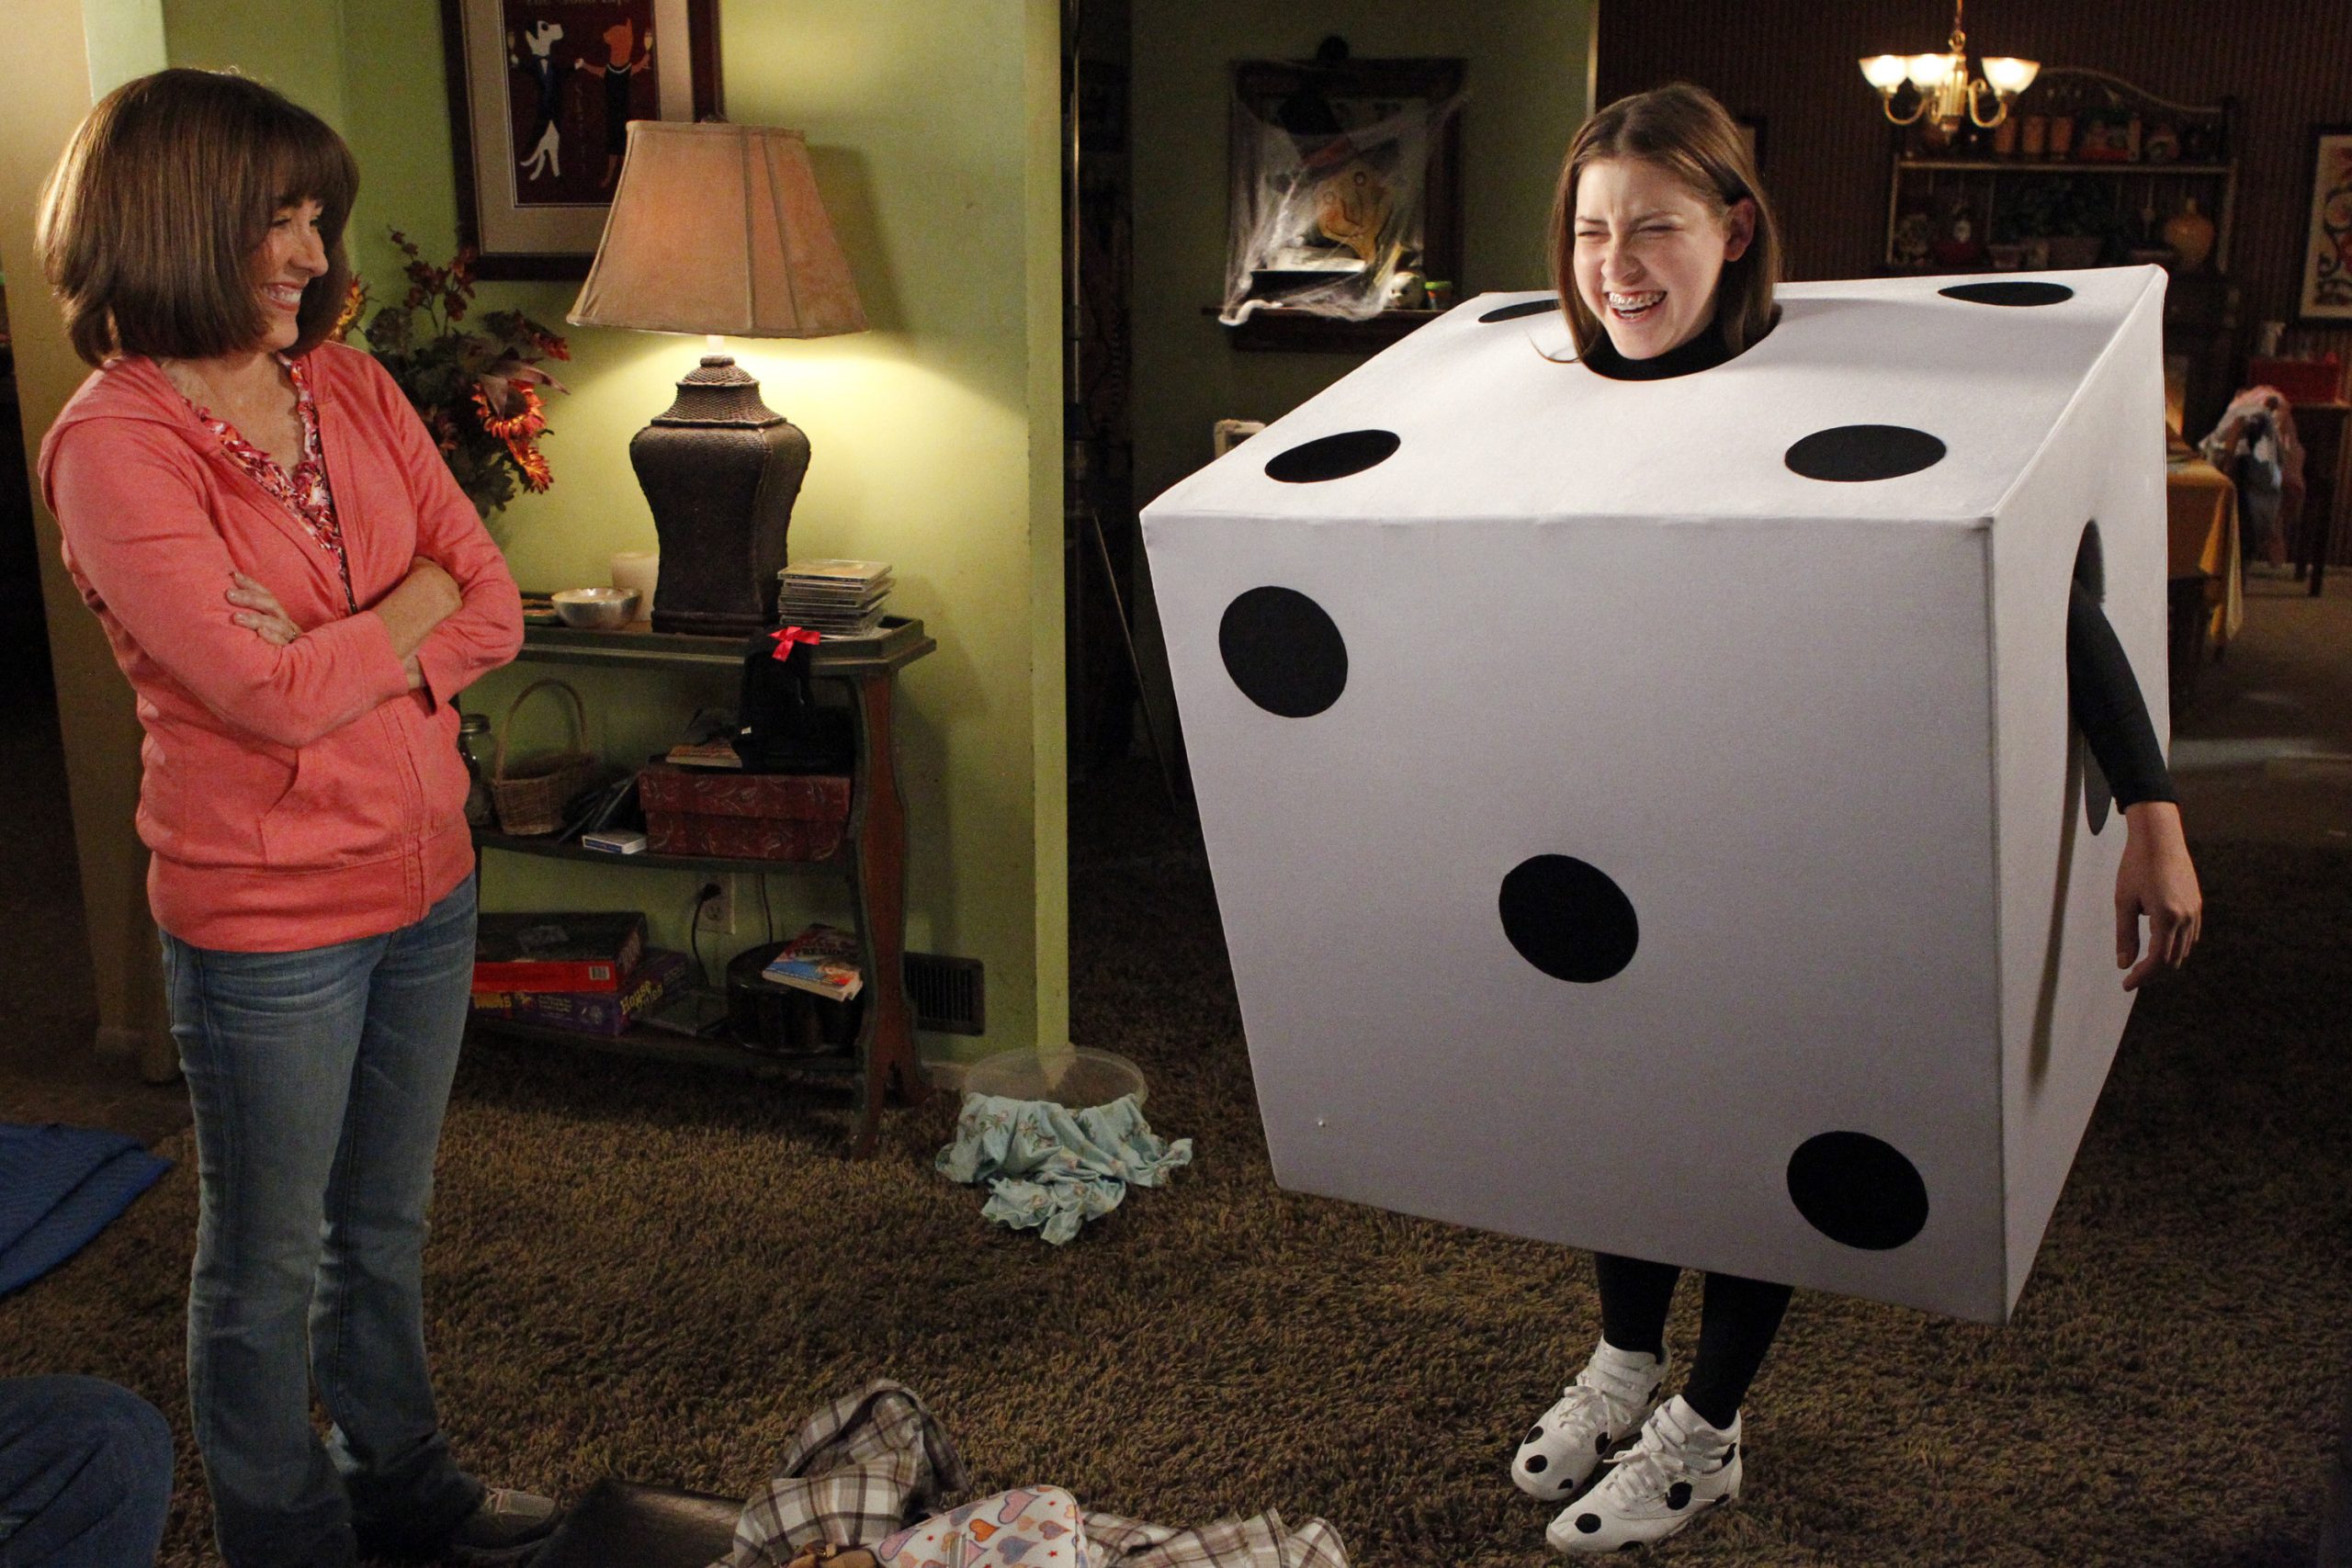 Patricia Heaton, left, with 'The Middle' co-star Eden Sher in a Halloween episode of the ABC series.